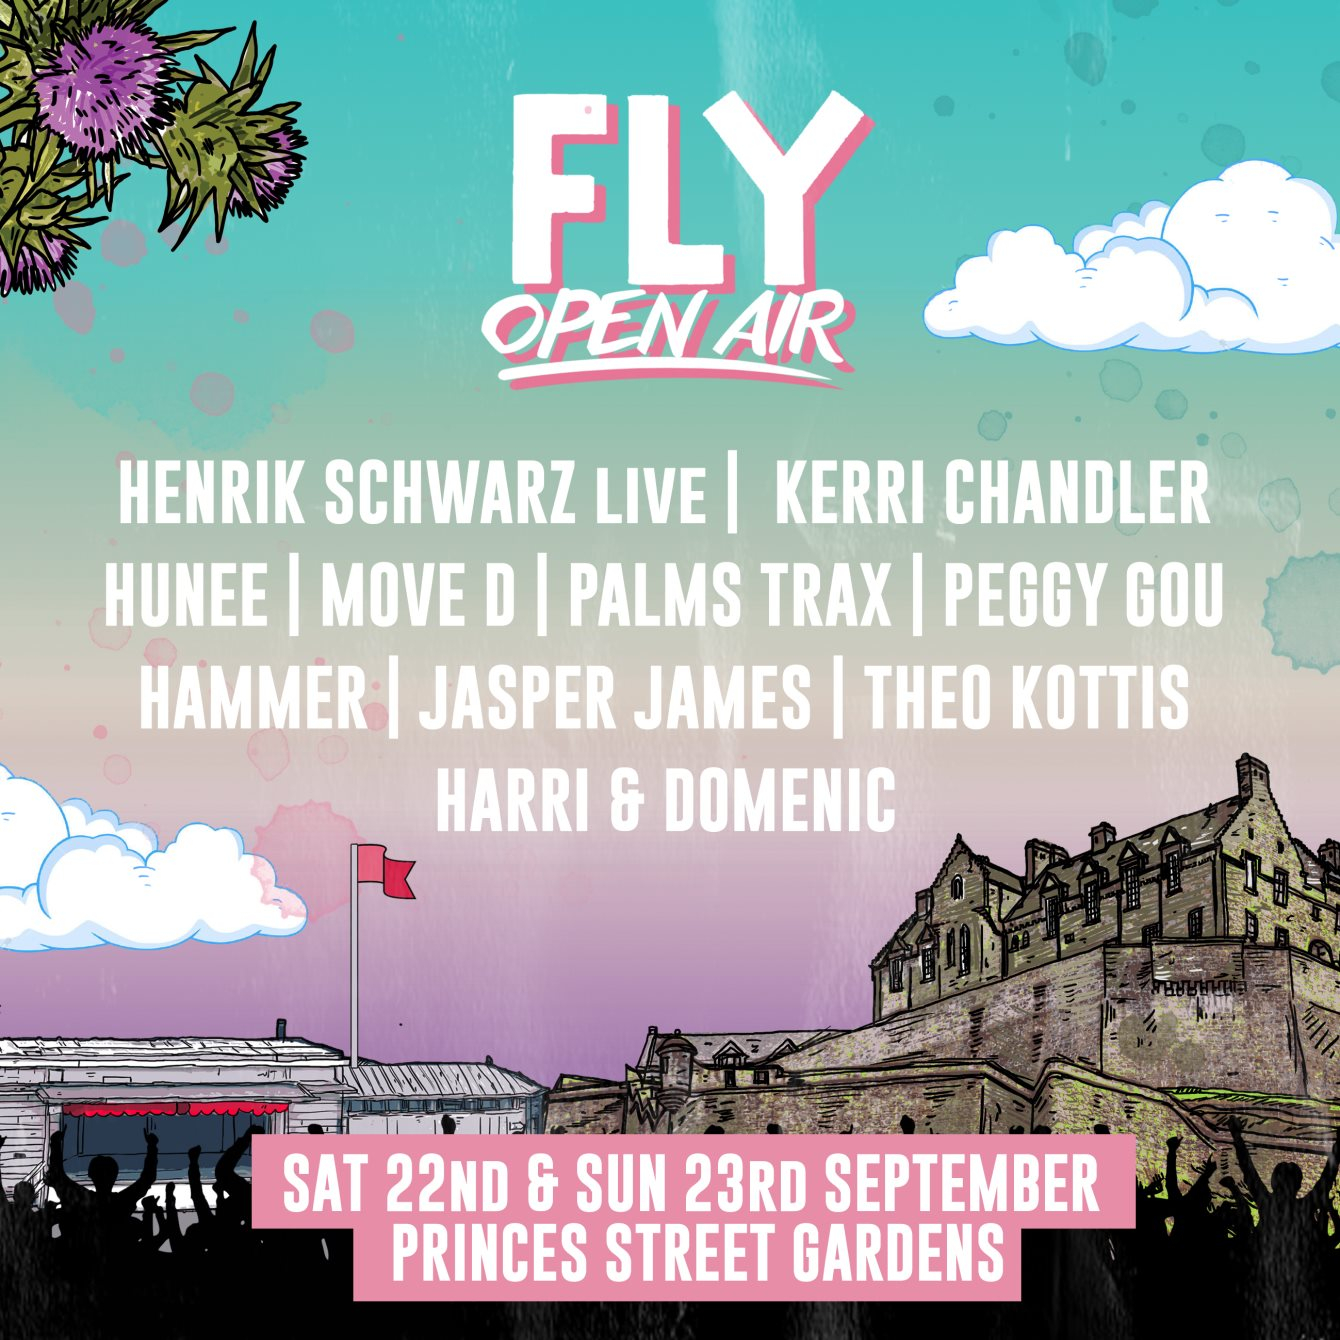 FLY Open Air